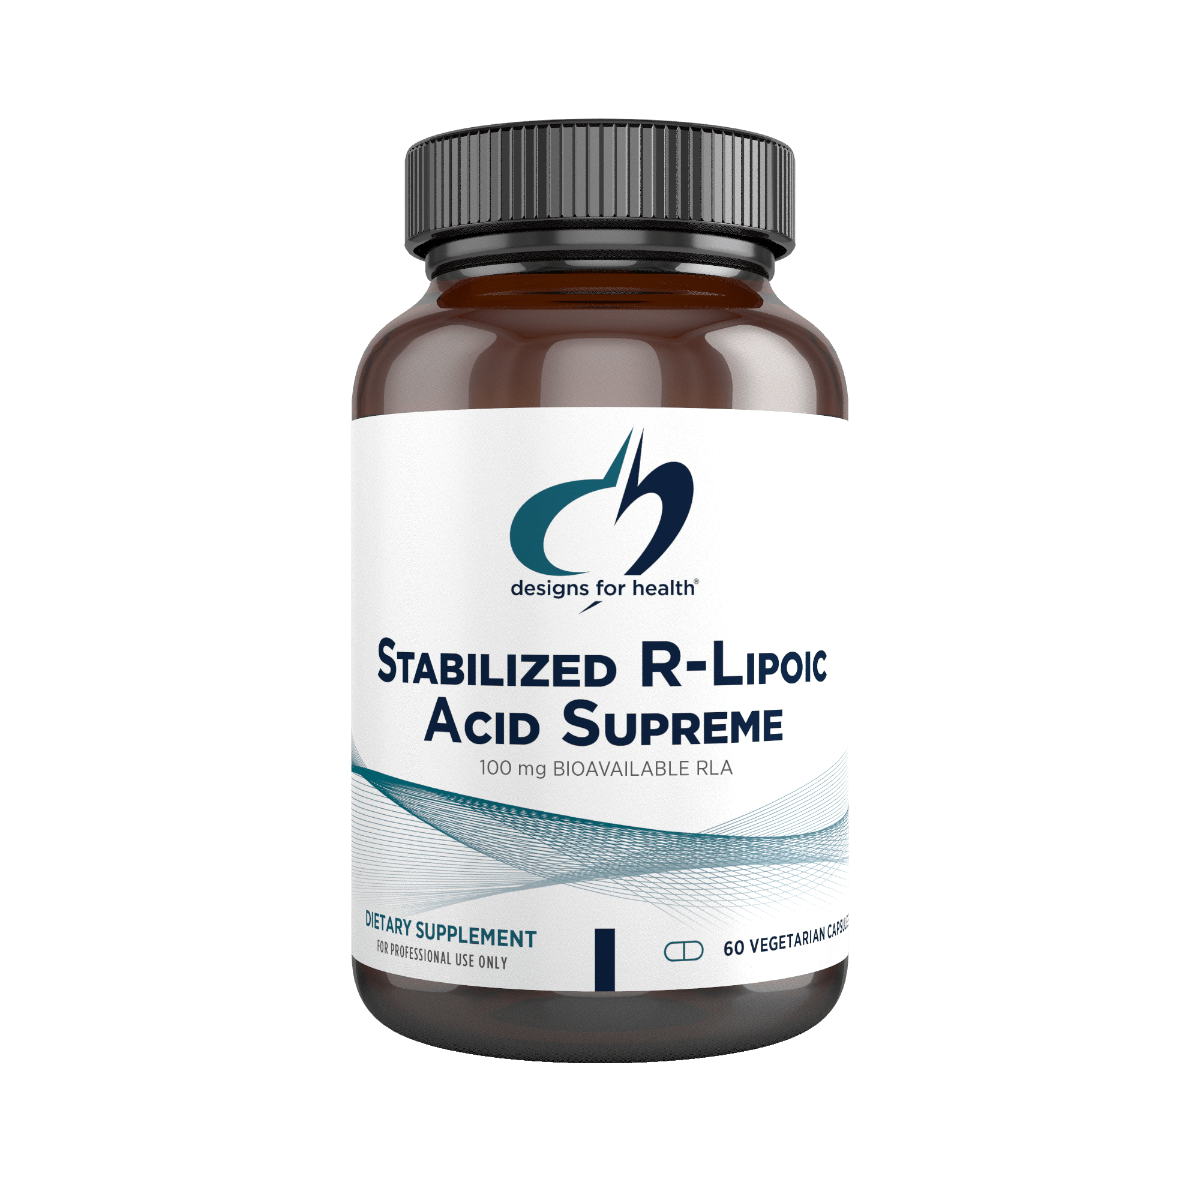 Stabilized R-Lipoic Acid Supreme Designs for Health Supplement - Conners Clinic